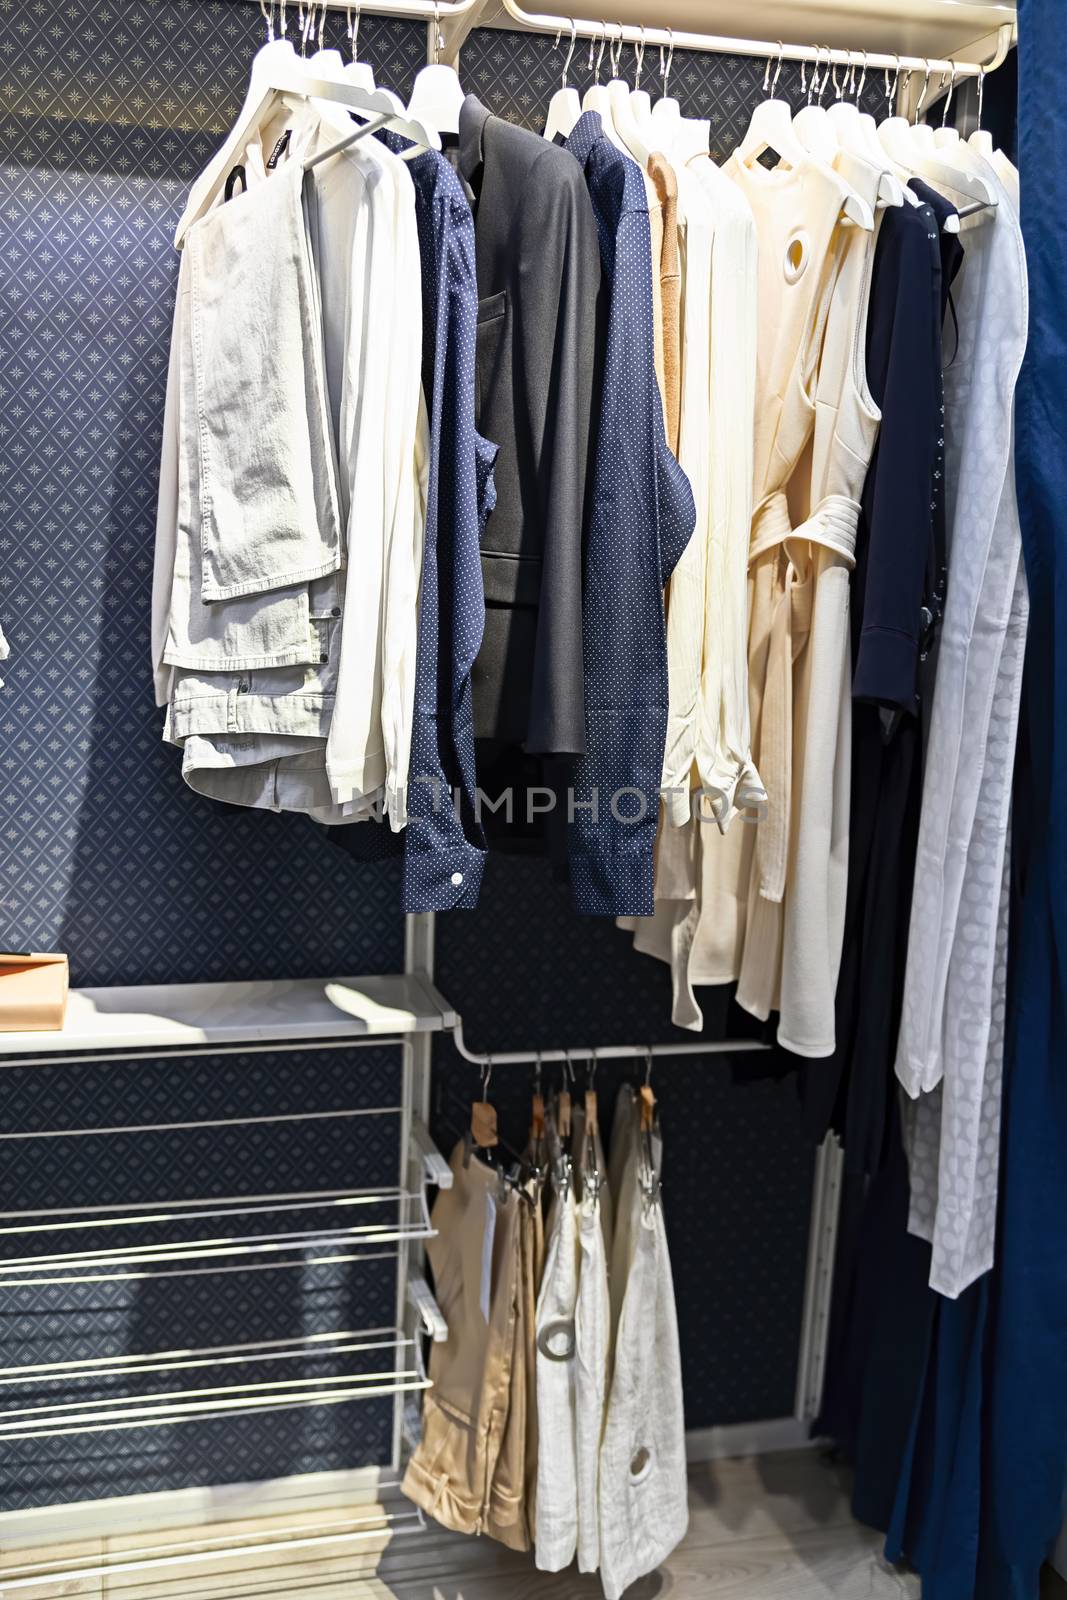 A number of different clothes hang on hangers in a modern blue closet. by bonilook